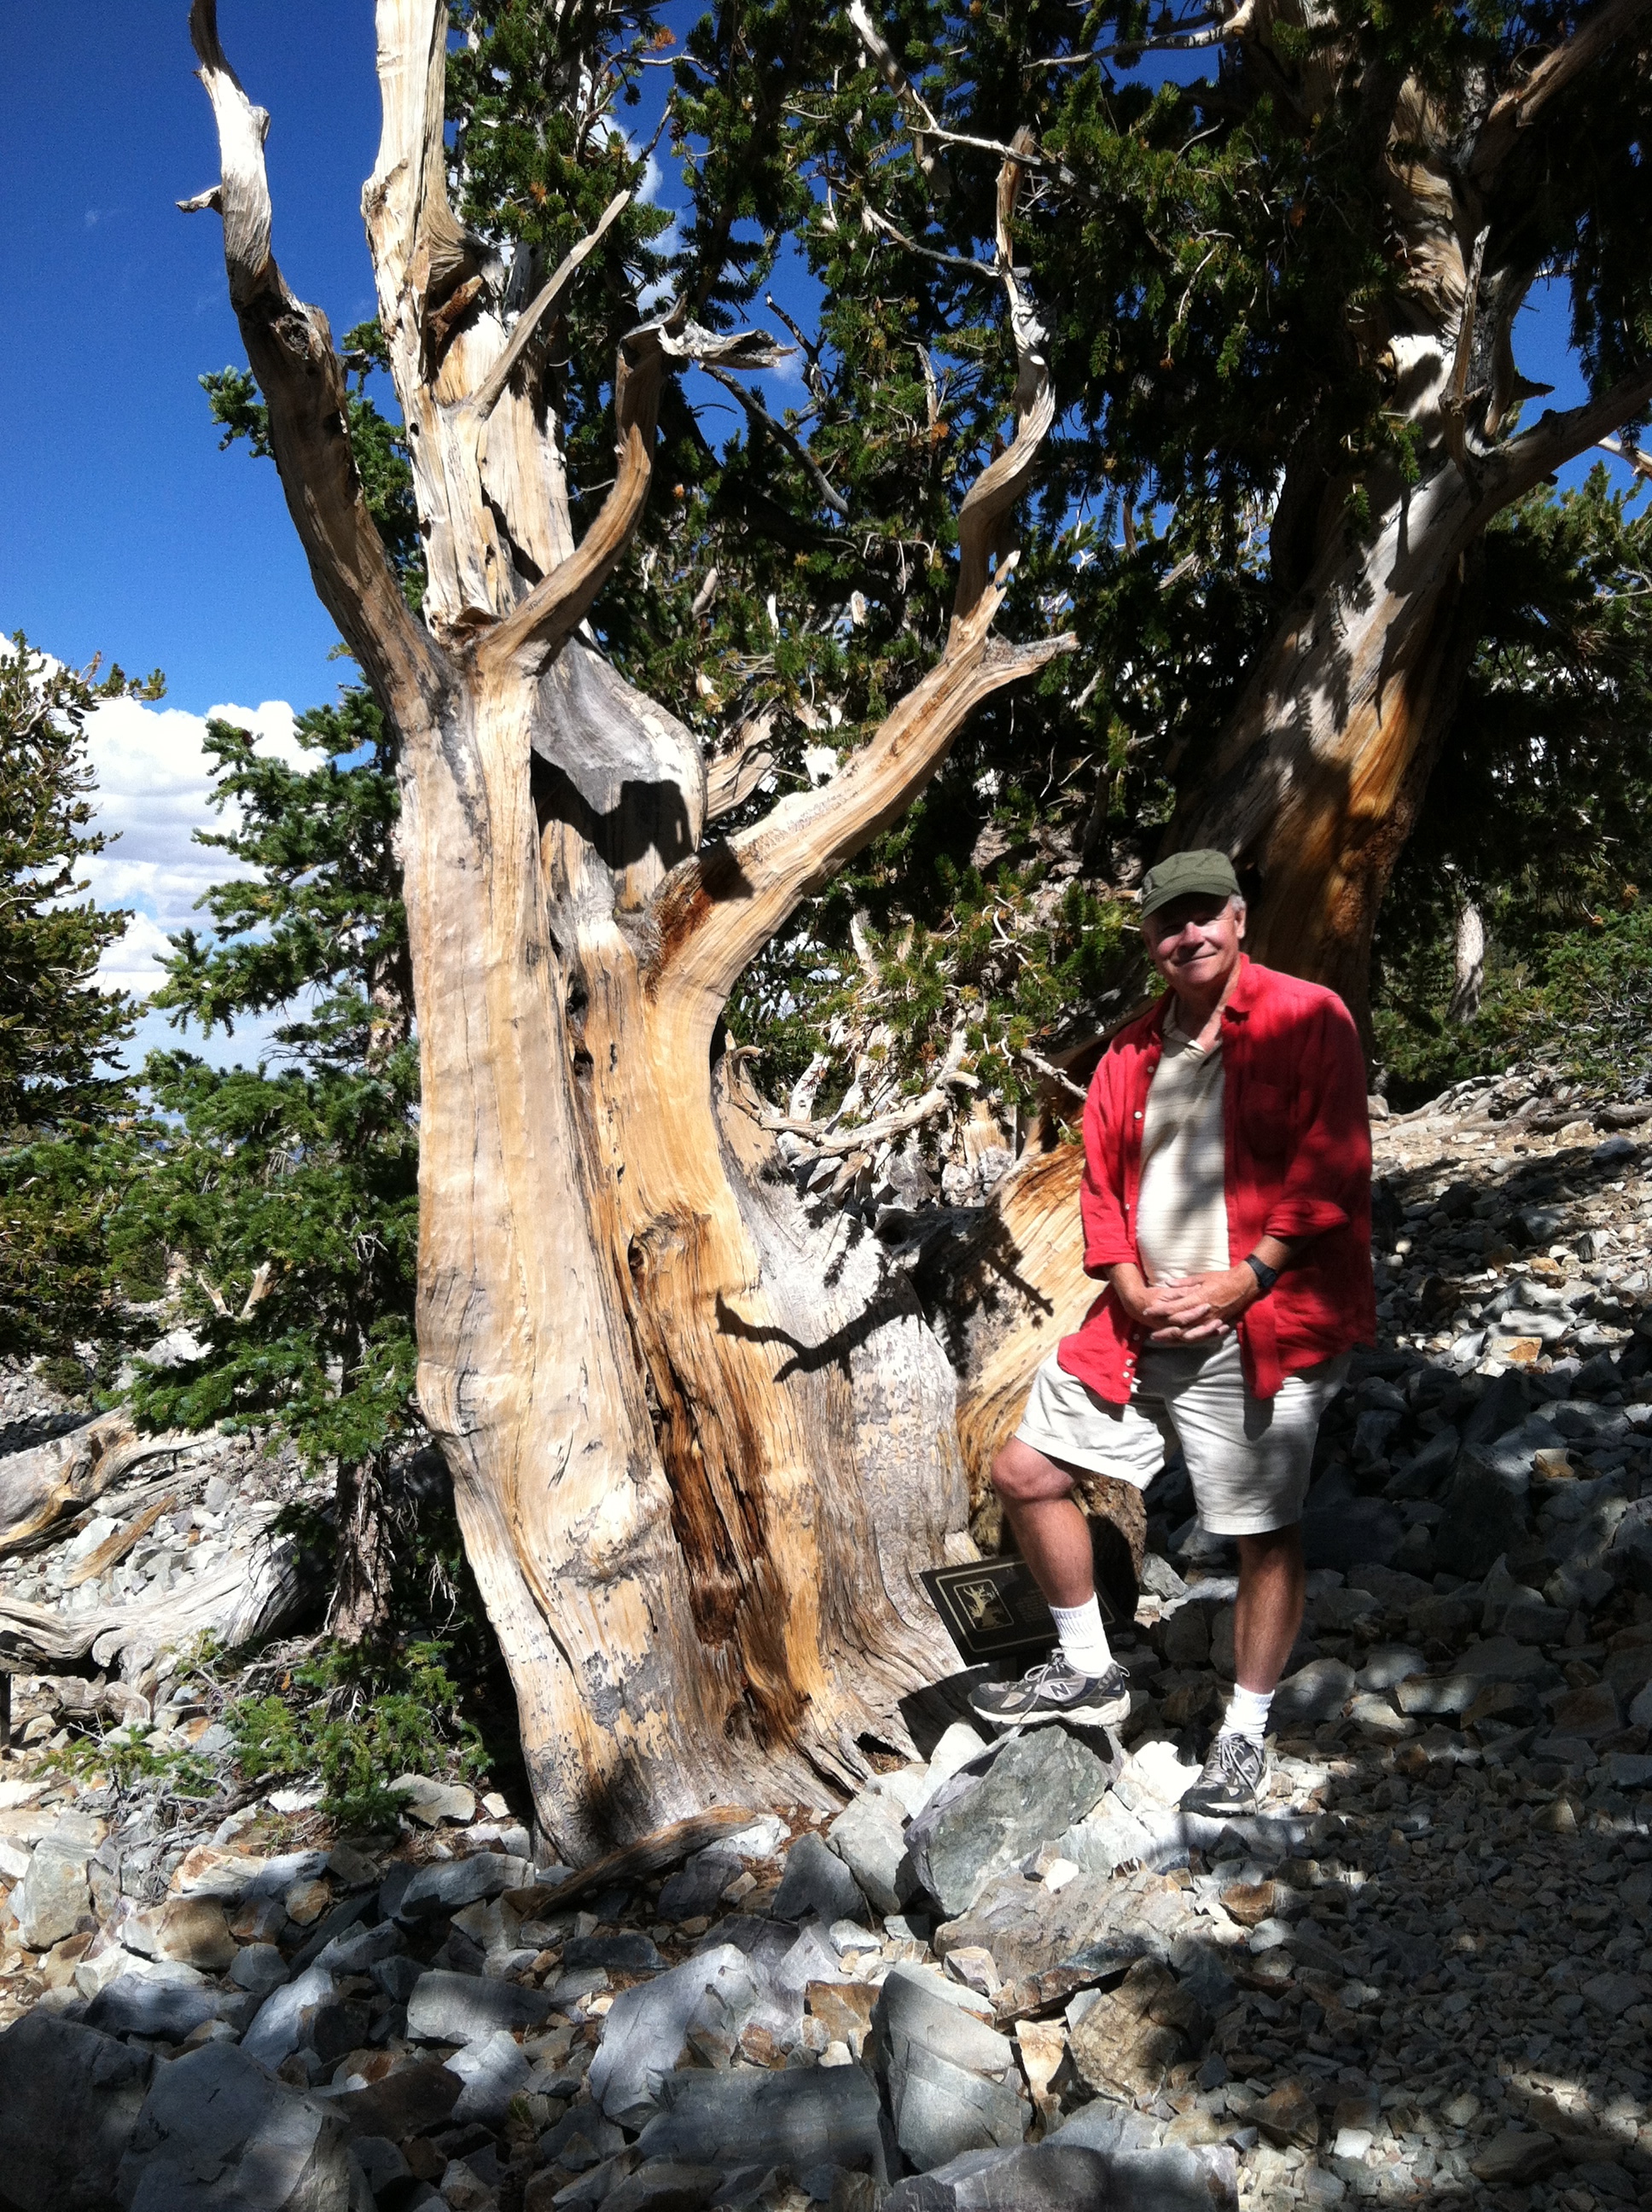 Director Ross Spears with an ancient bristle cone pine tree during the filming for THE TRUTH ABOUT TREES in 2012.